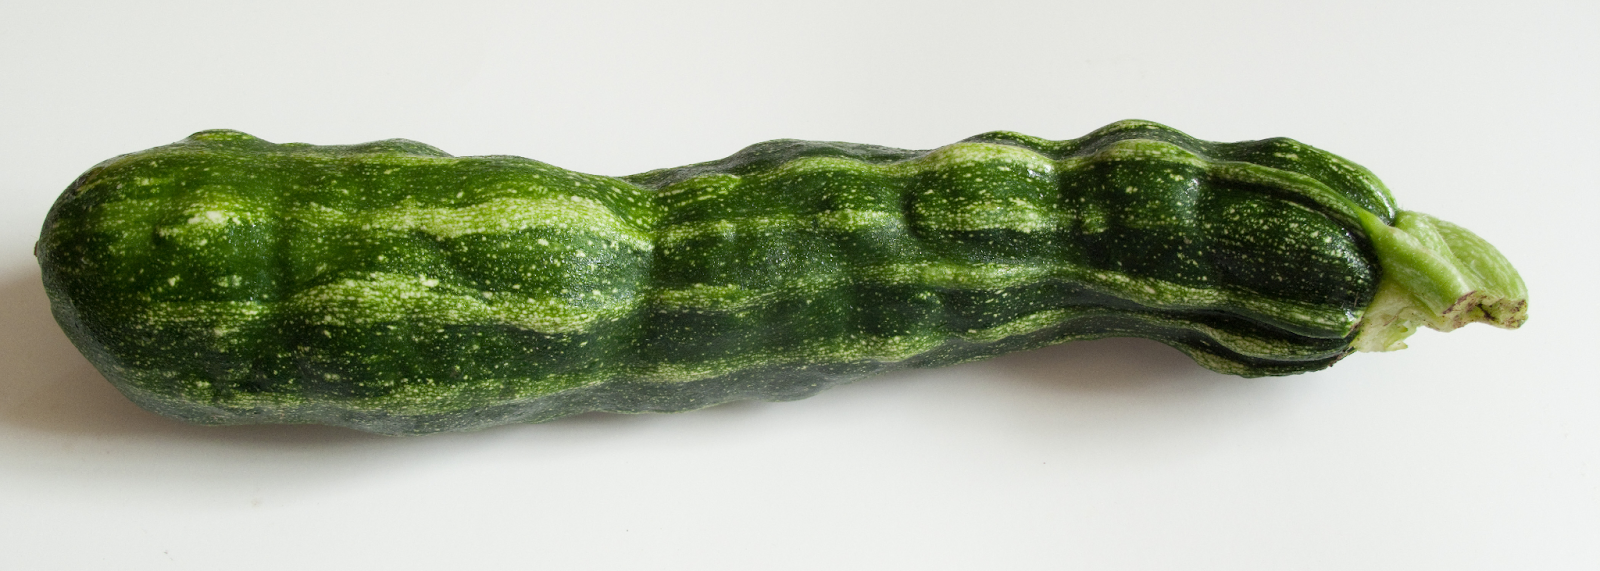 Close-up of a bumpy zucchini with irregularities on the surface, possibly due to environmental stress, pollination issues, or pest infestation